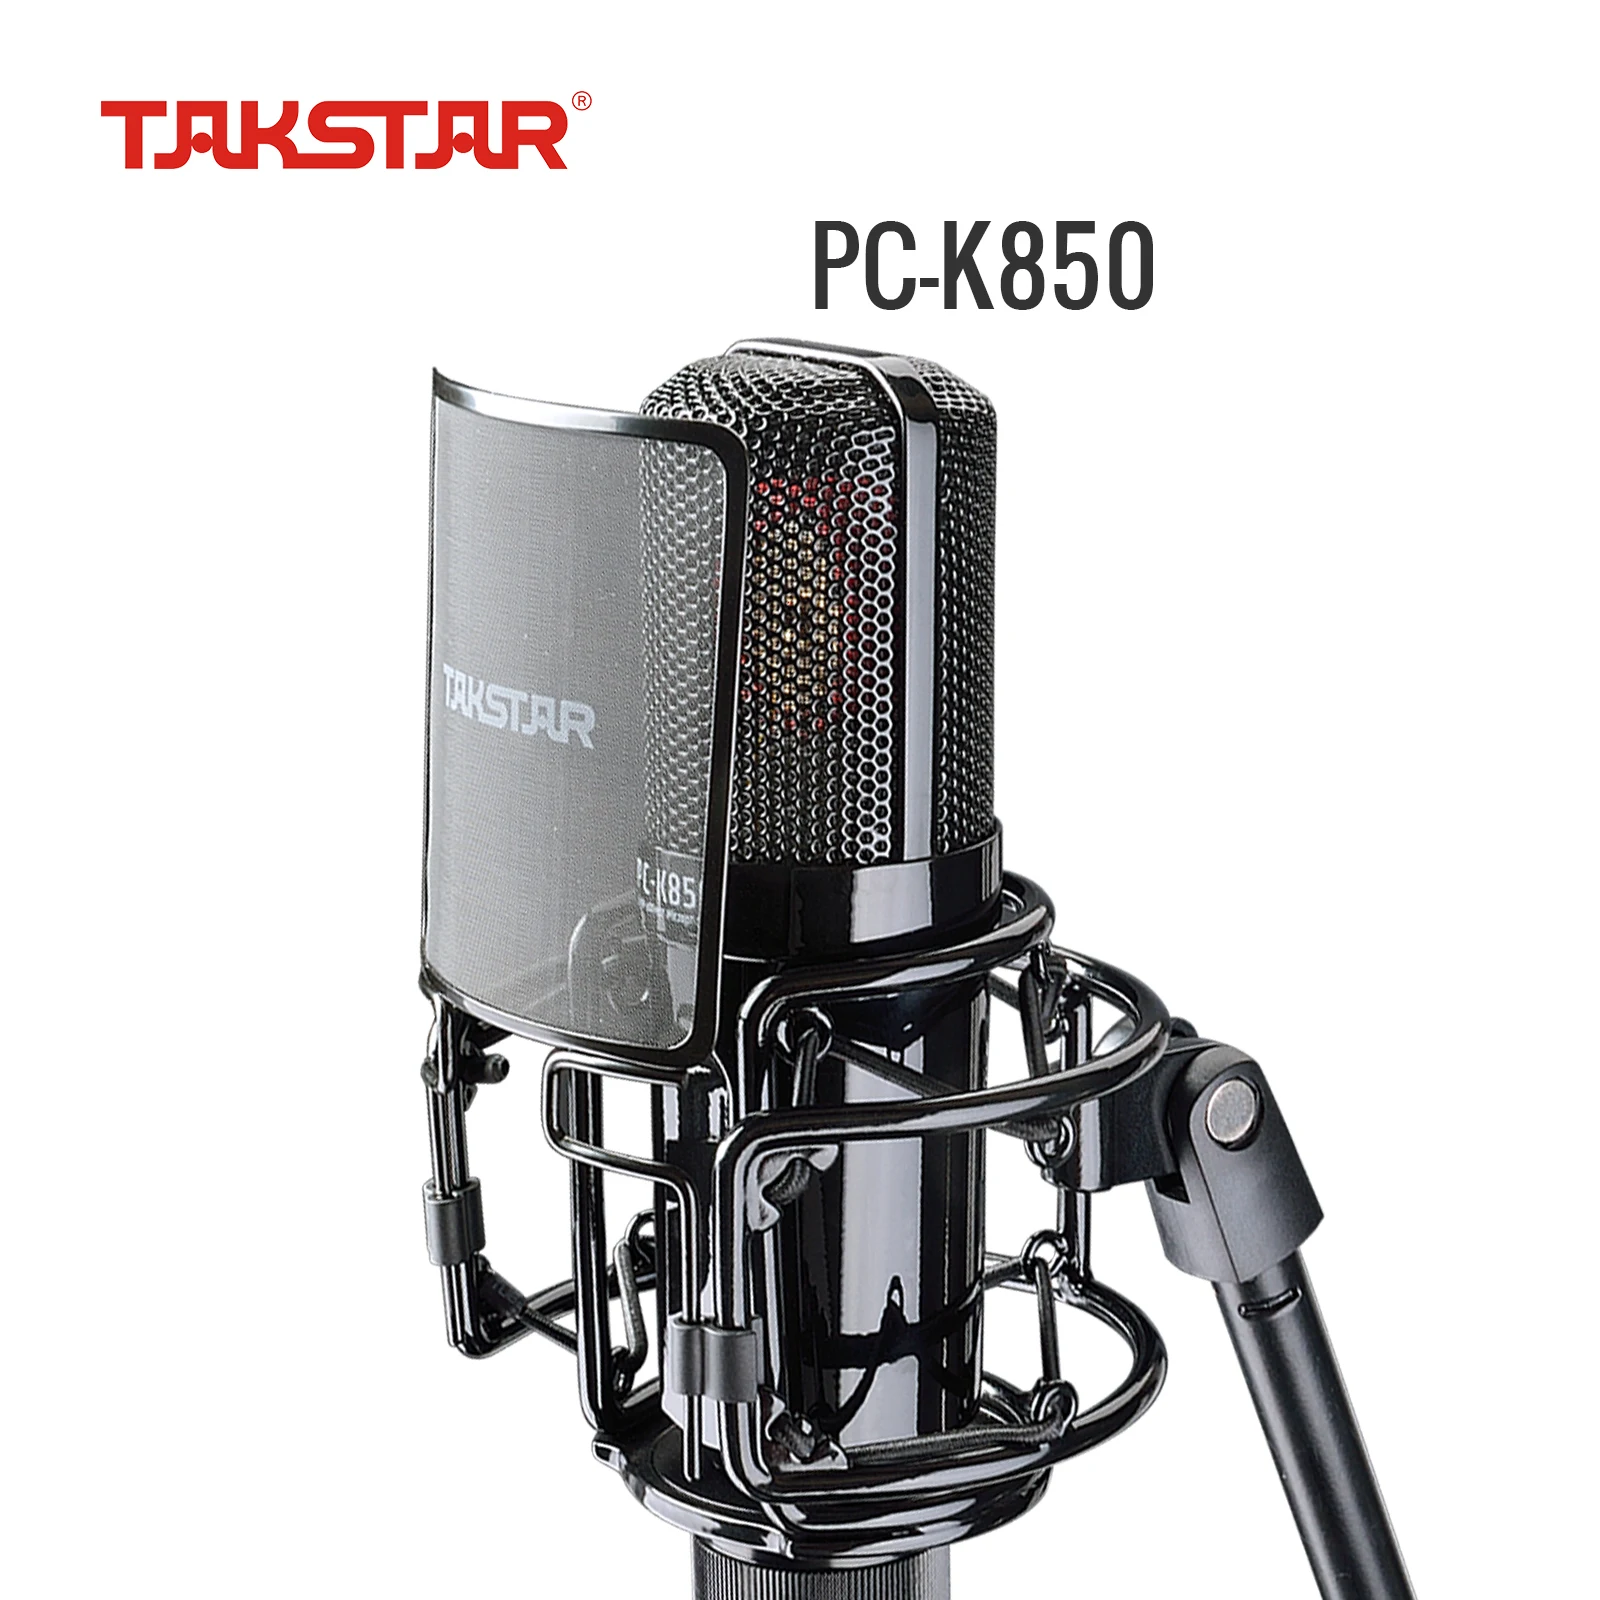 

XLR Condenser Microphone with 34mm Large Diaphragm, Takstar Cardioid Studio Mic for Recording Podcasting Streaming YouTube Video